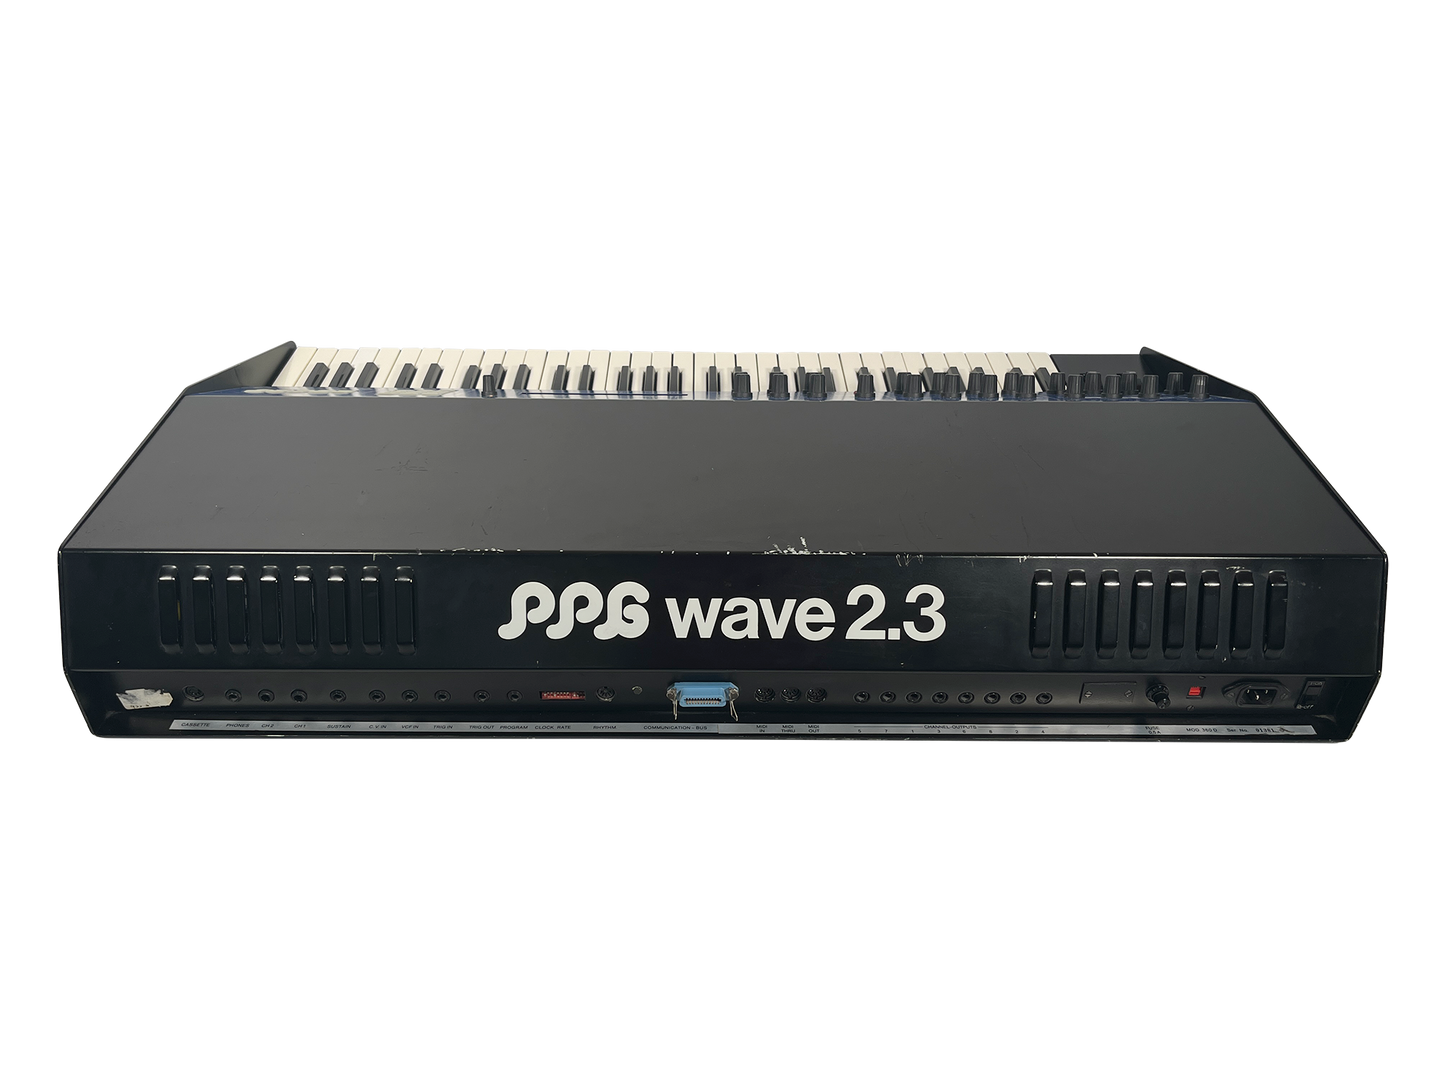 PPG Wave 2.3 Digital Synthesizer